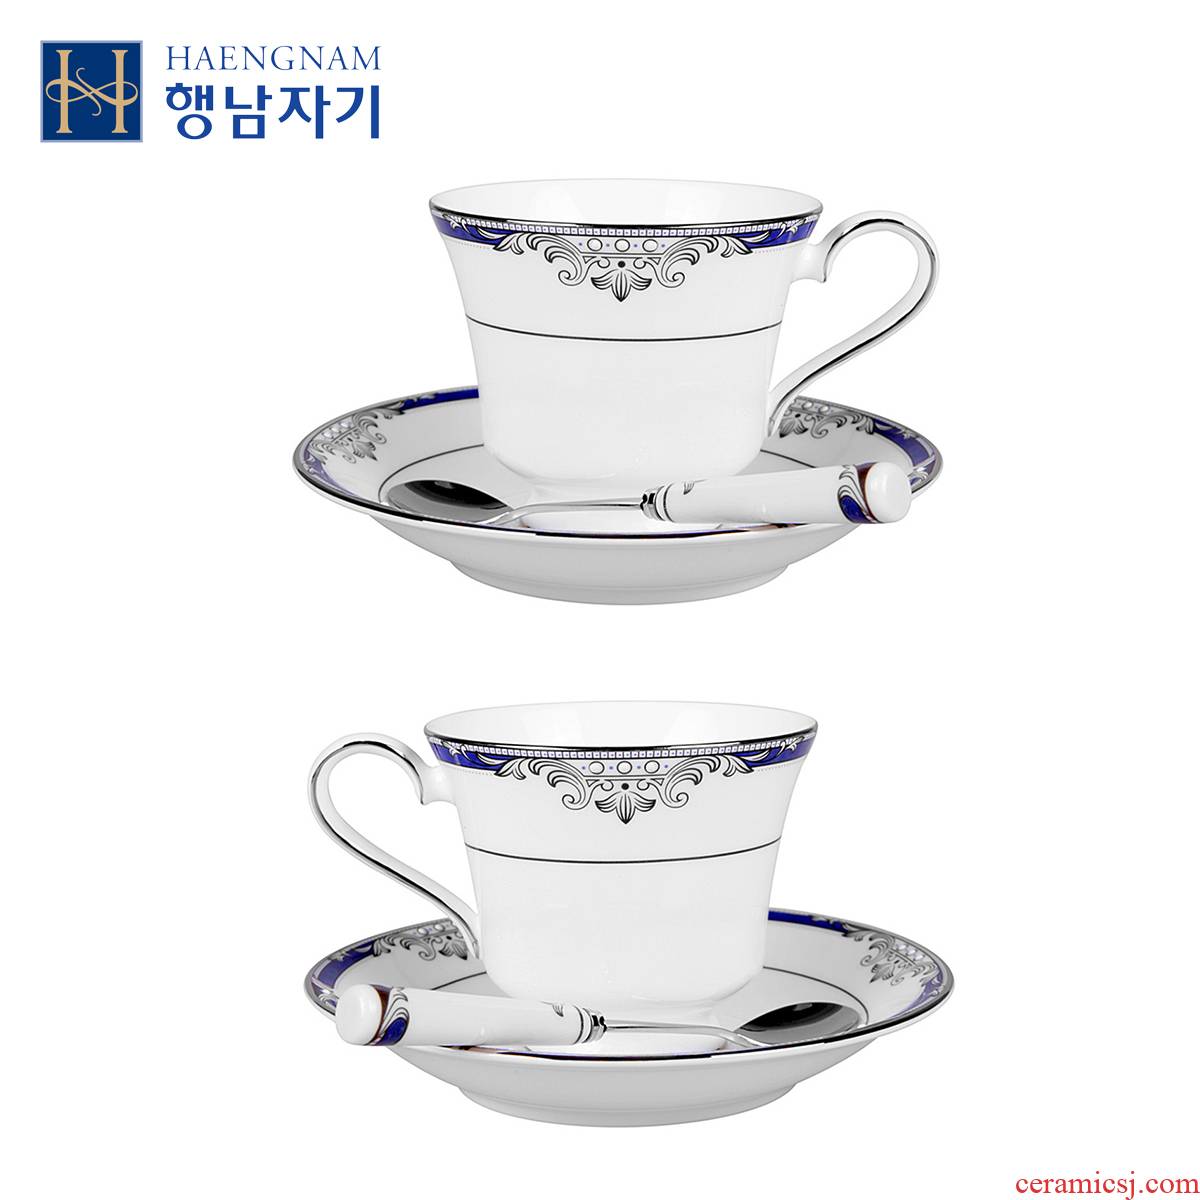 HAENGNAM Han Guoxing south China knight ipads China tea/coffee cup sets imported from the CPU